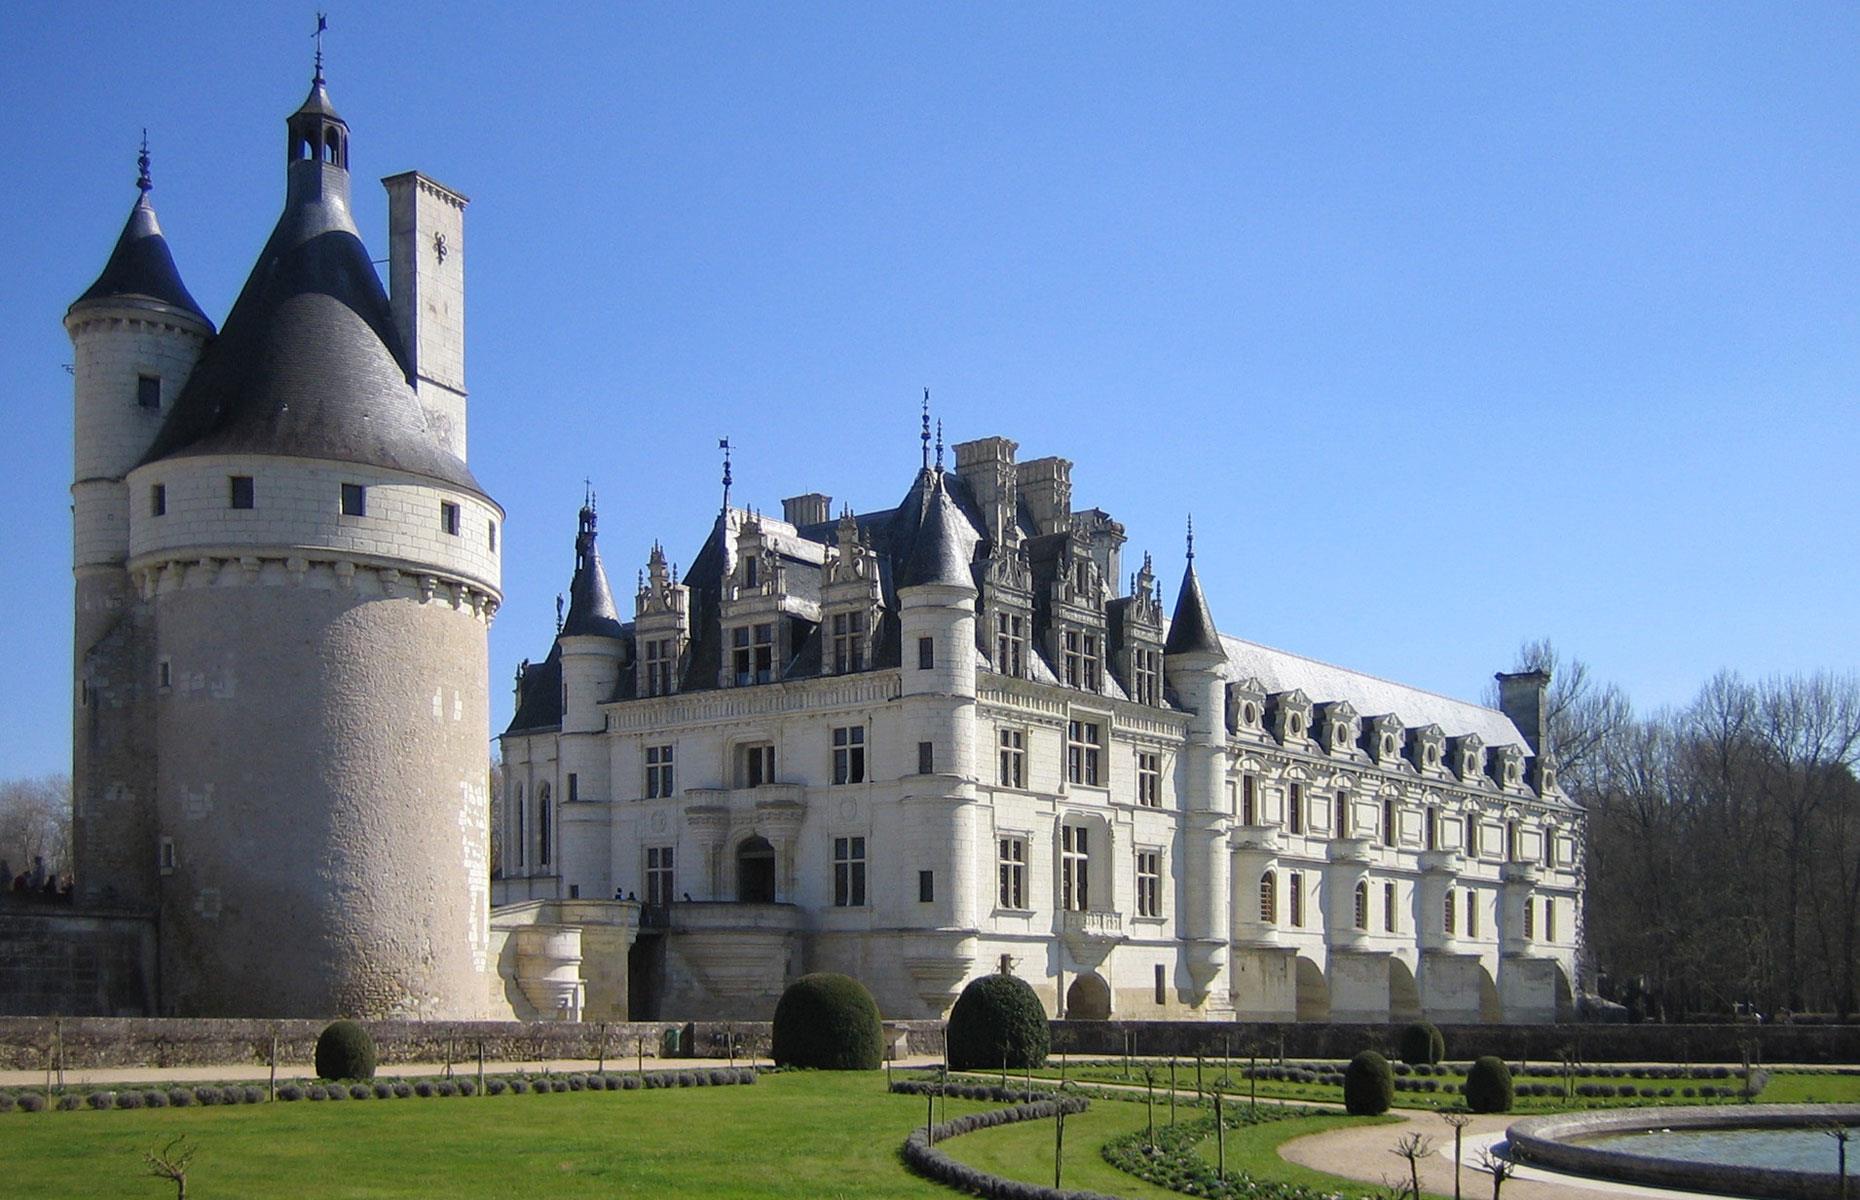 <p>Buoyed on by a booming property market, Sarot Group, the developer of the project, envisaged a whimsical and romantic spa resort with 732 villas reportedly inspired among other things by the Château de Chenonceau in France's Loire Valley (pictured) and Istanbul's conical Galata Tower. The firm plumped for an idyllic 250-acre site just outside the historic town of Mudurnu in the hills of northwestern Turkey, and construction on the fanciful $200 million development began around 2014.</p>